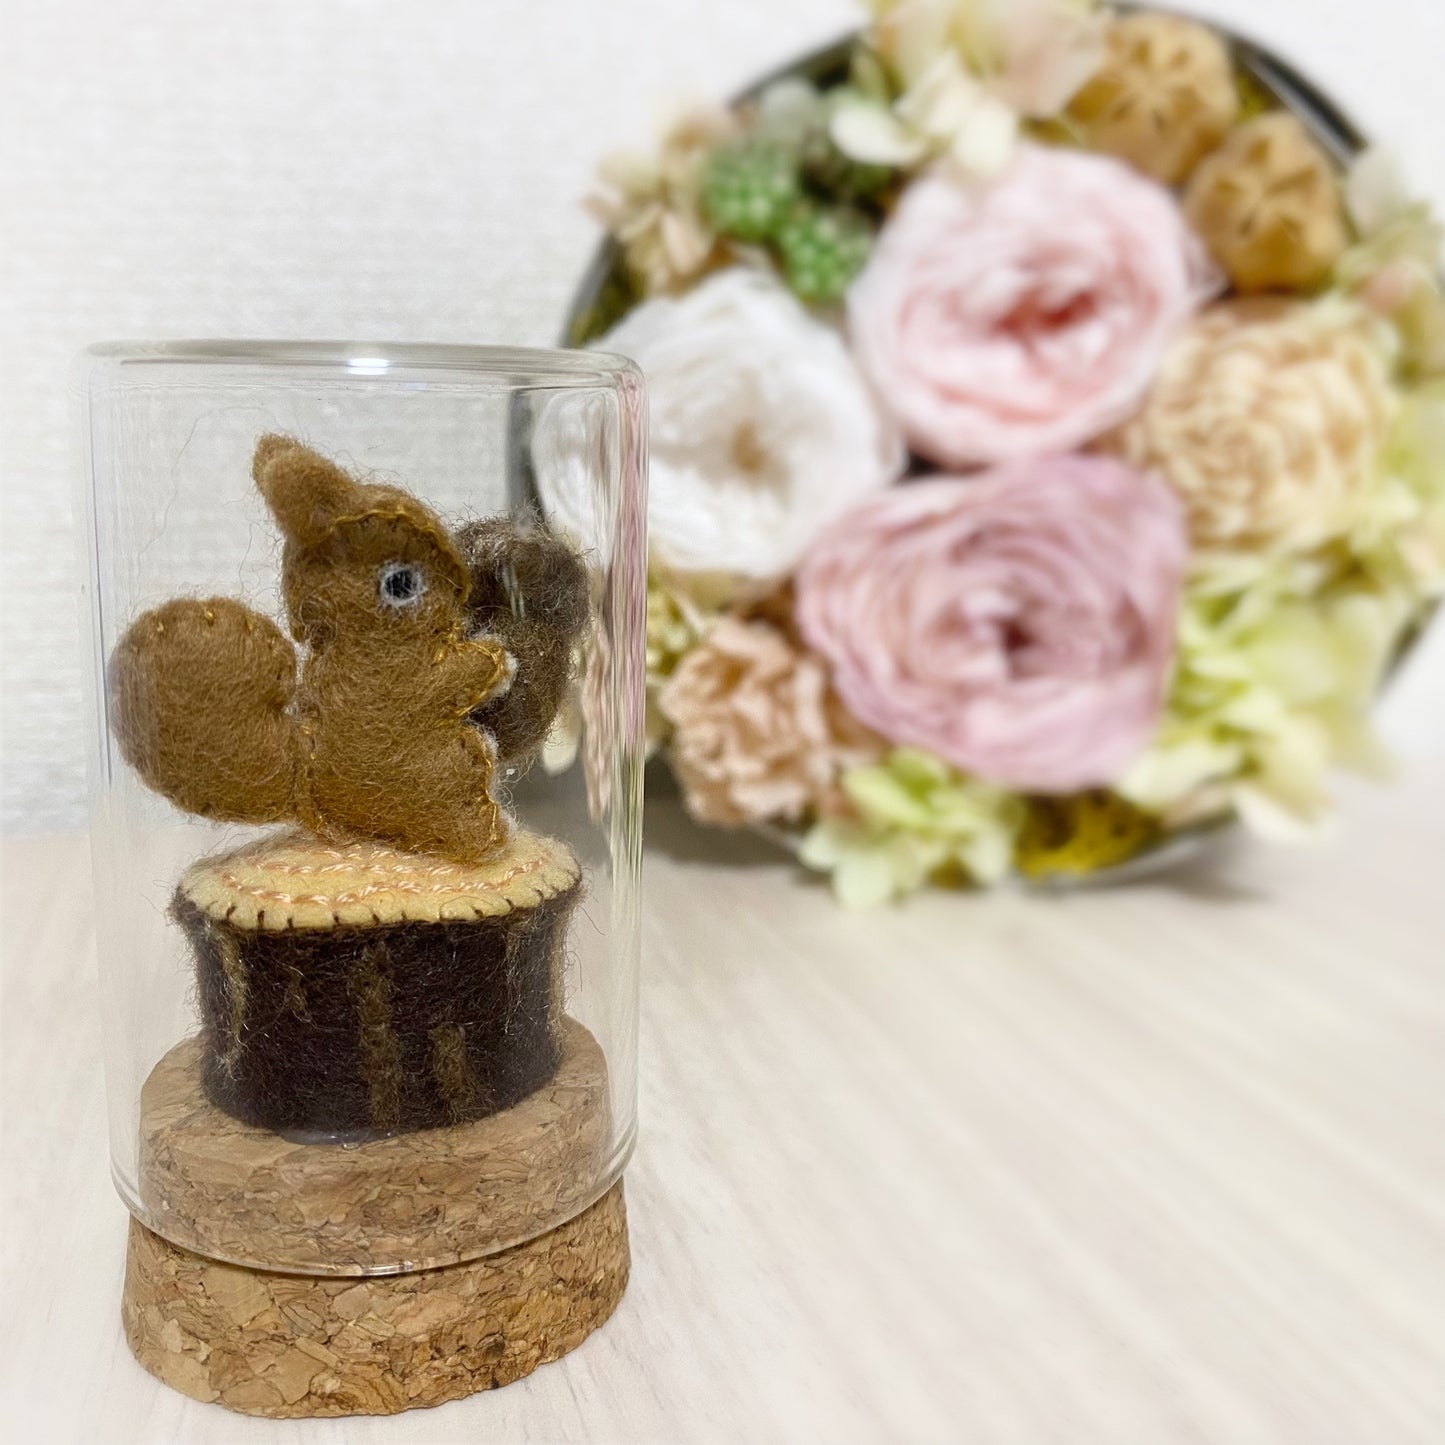 Baby squirrel in a glass bottle